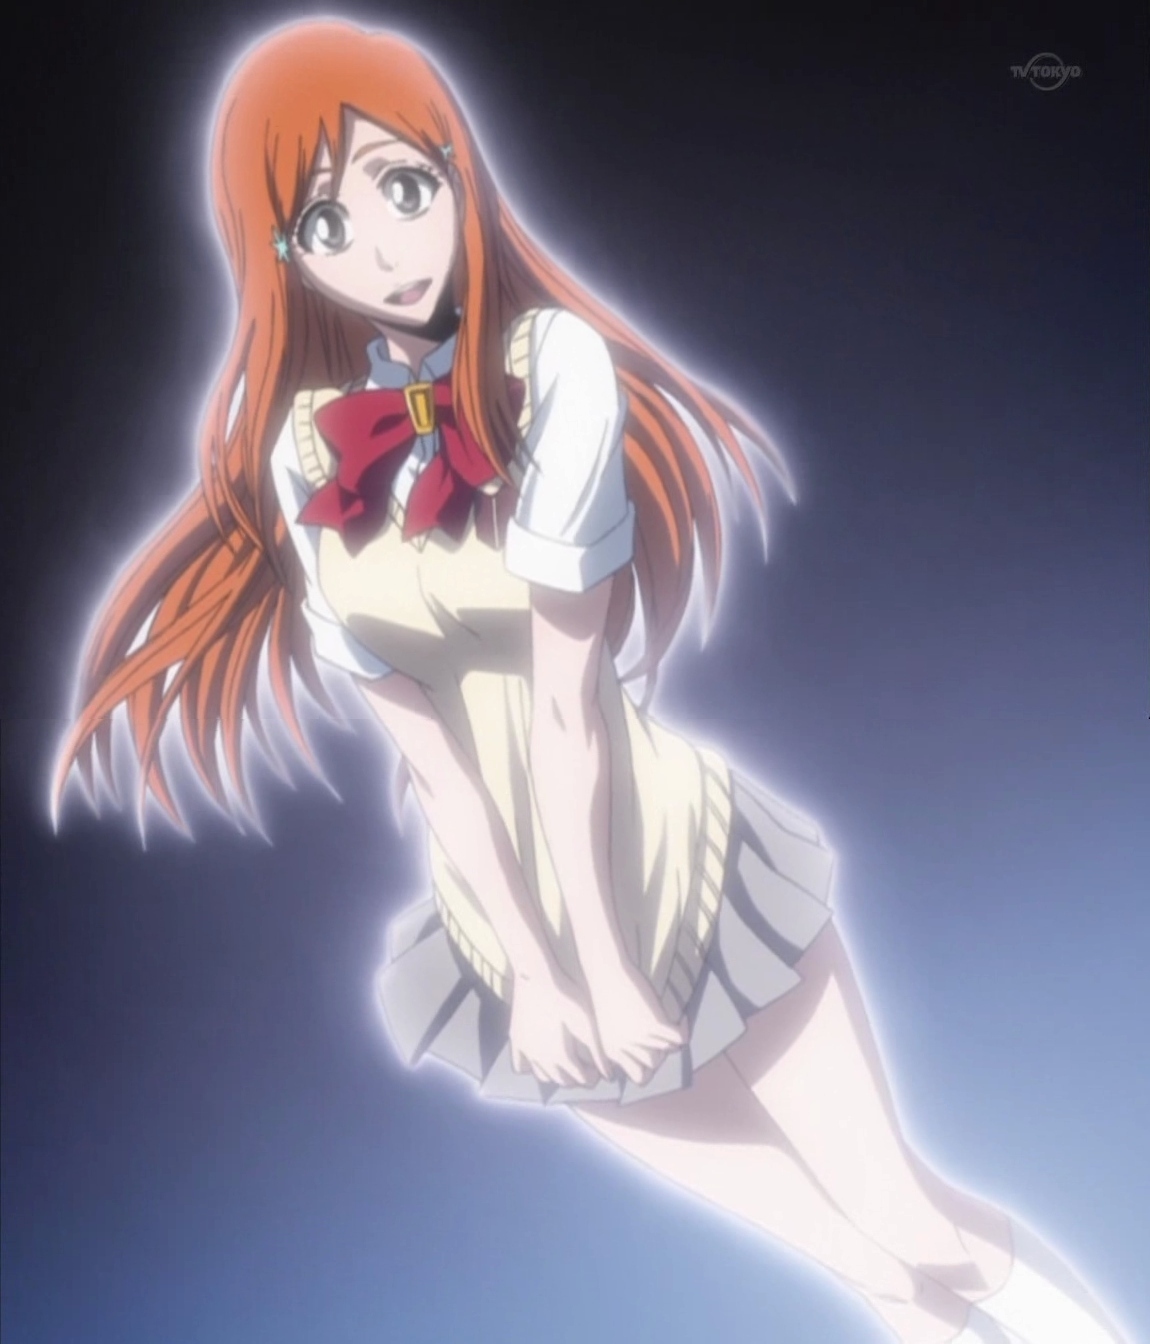 Orihime Inoue Image HD Wallpaper And Background Photos